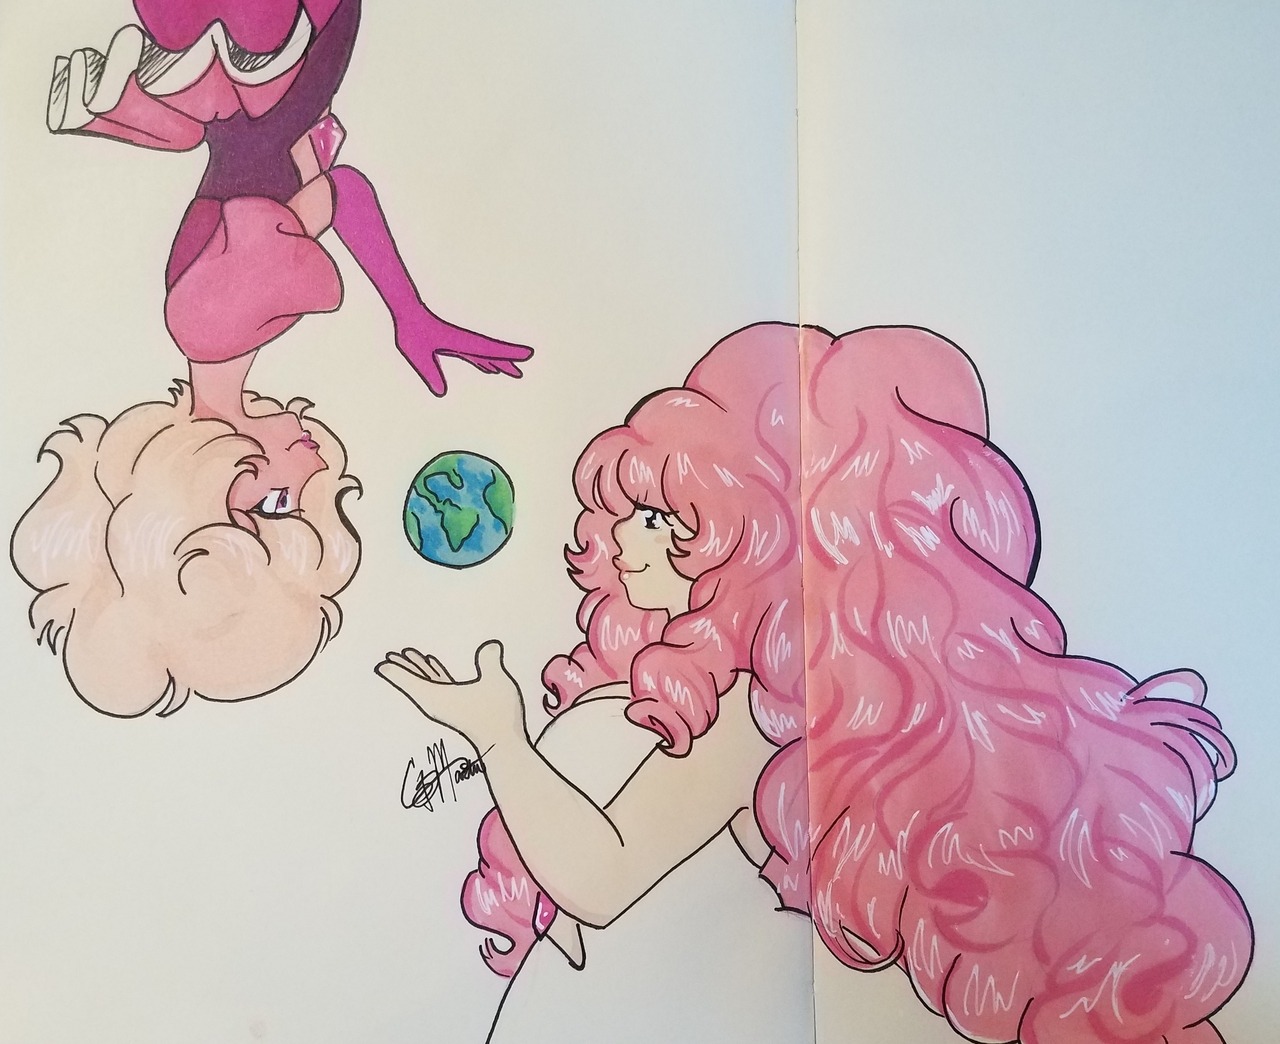 Pink diamond and Rose Quarts. My favorite character from Steven Universe ❤❤❤